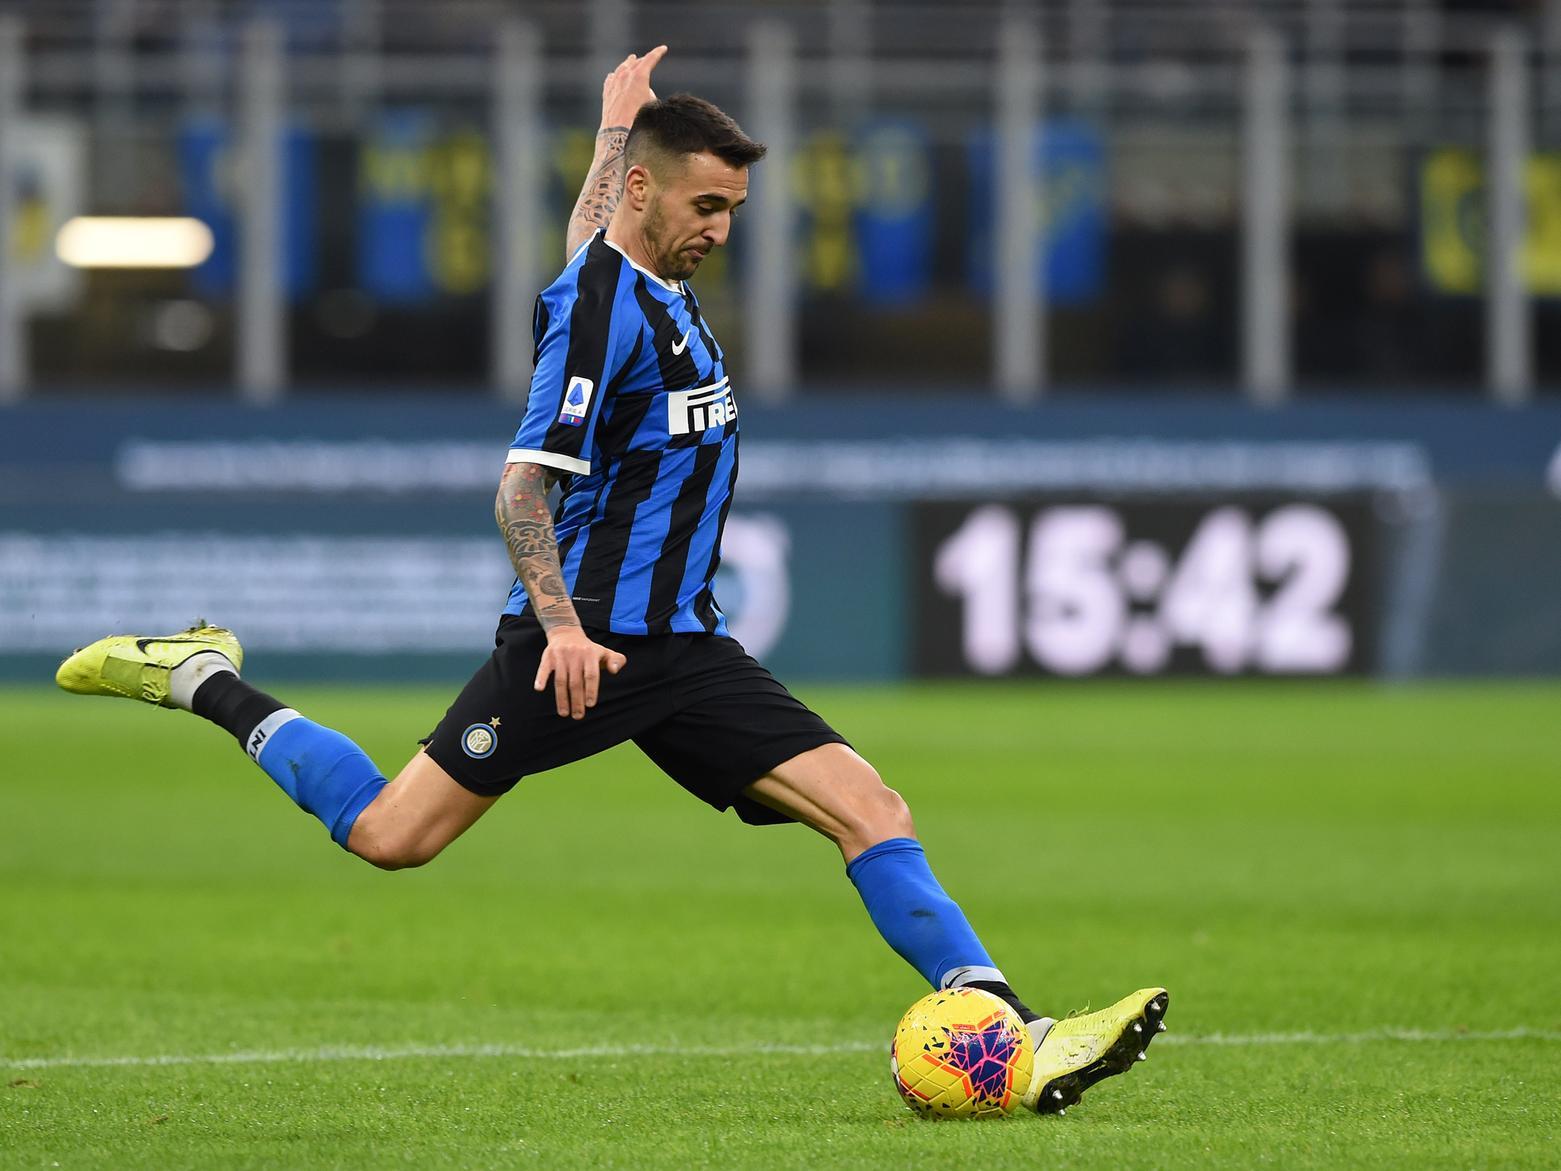 Both of Everton's key targets look to be stalling, with a real lack of progress on deals for (the appropriately named) Everton Soares and Matias Vecino. Still, Carlo Ancellotti should be able to pull something out the bag.